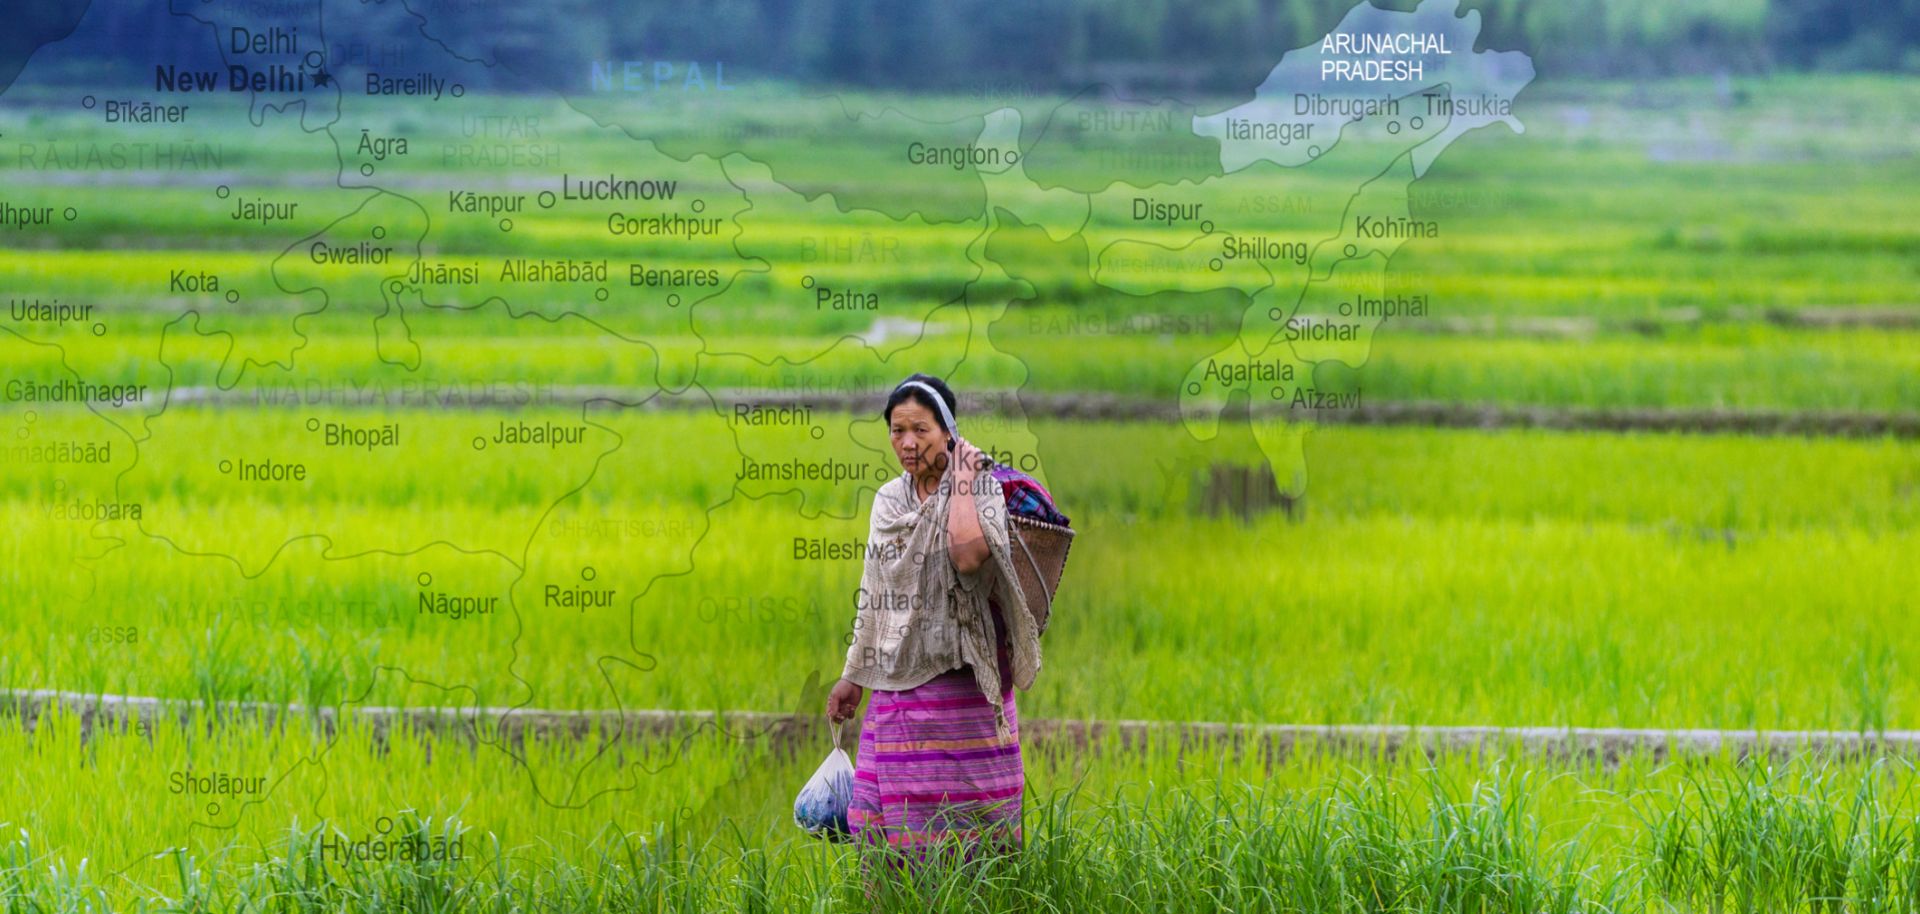 A woman works in the fields of Arunachal Pradesh, a territory India controls but China claims as part of Tibet.